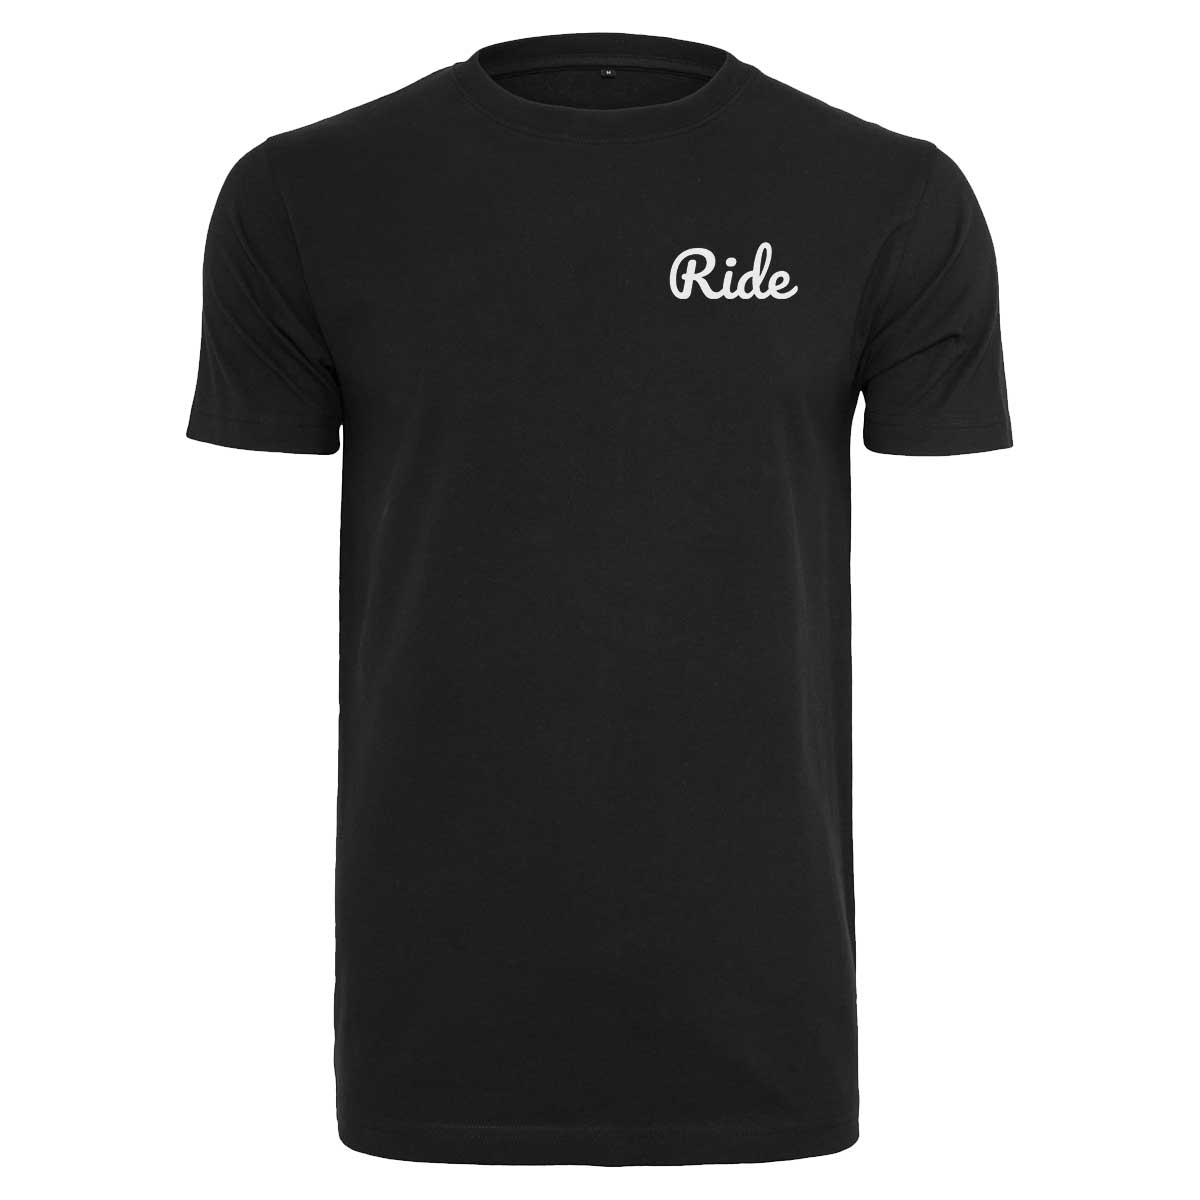 RIDERS GONNA RIDE® T-Shirt RIDE - RIDERS GONNA RIDE®